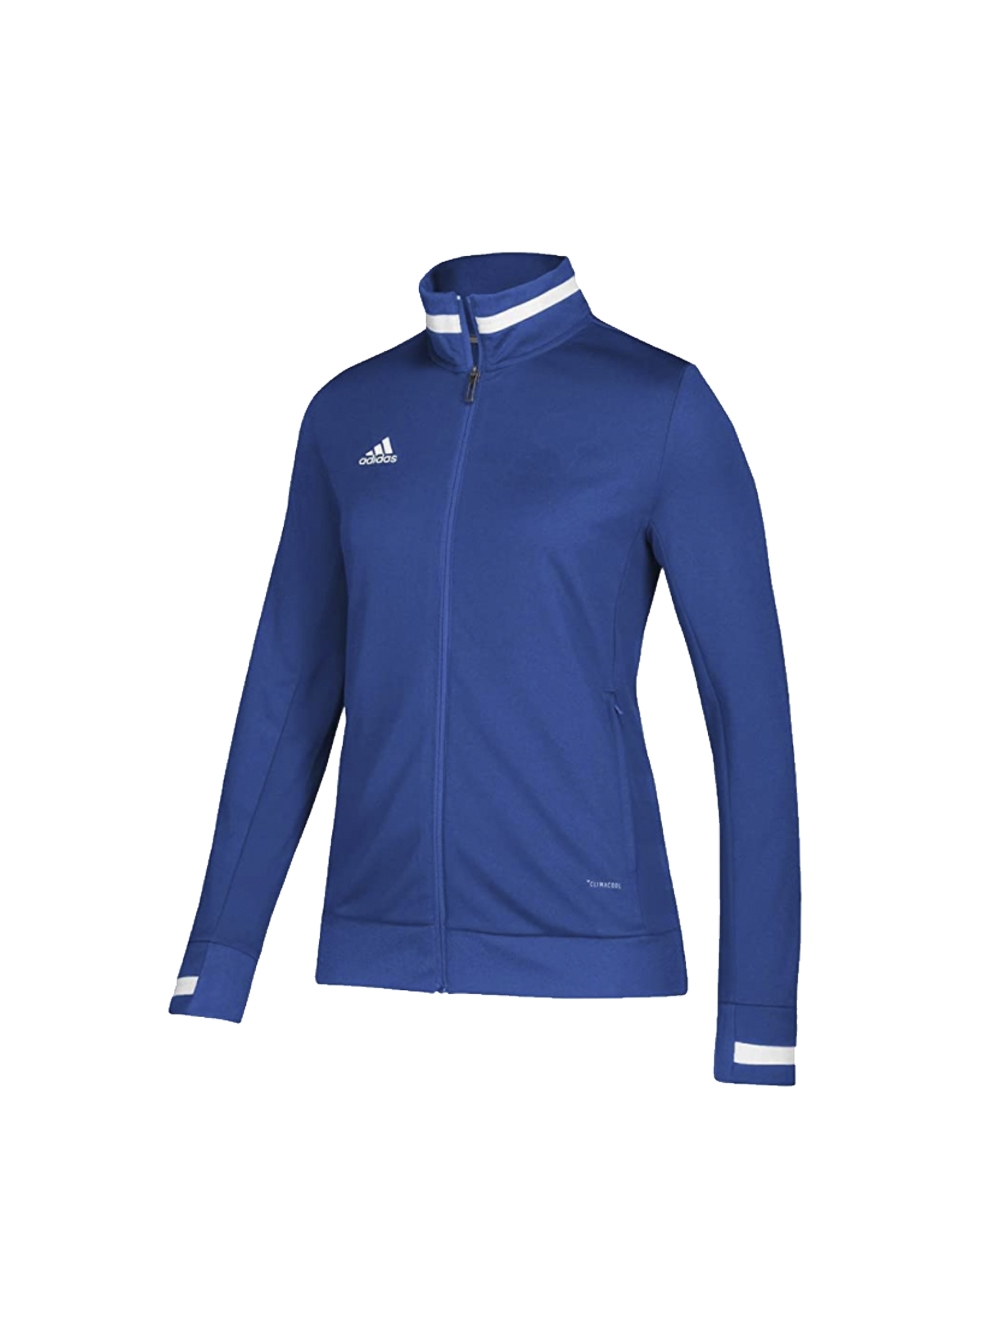 Adidas Team 19 Jacket | Midwest Volleyball Warehouse